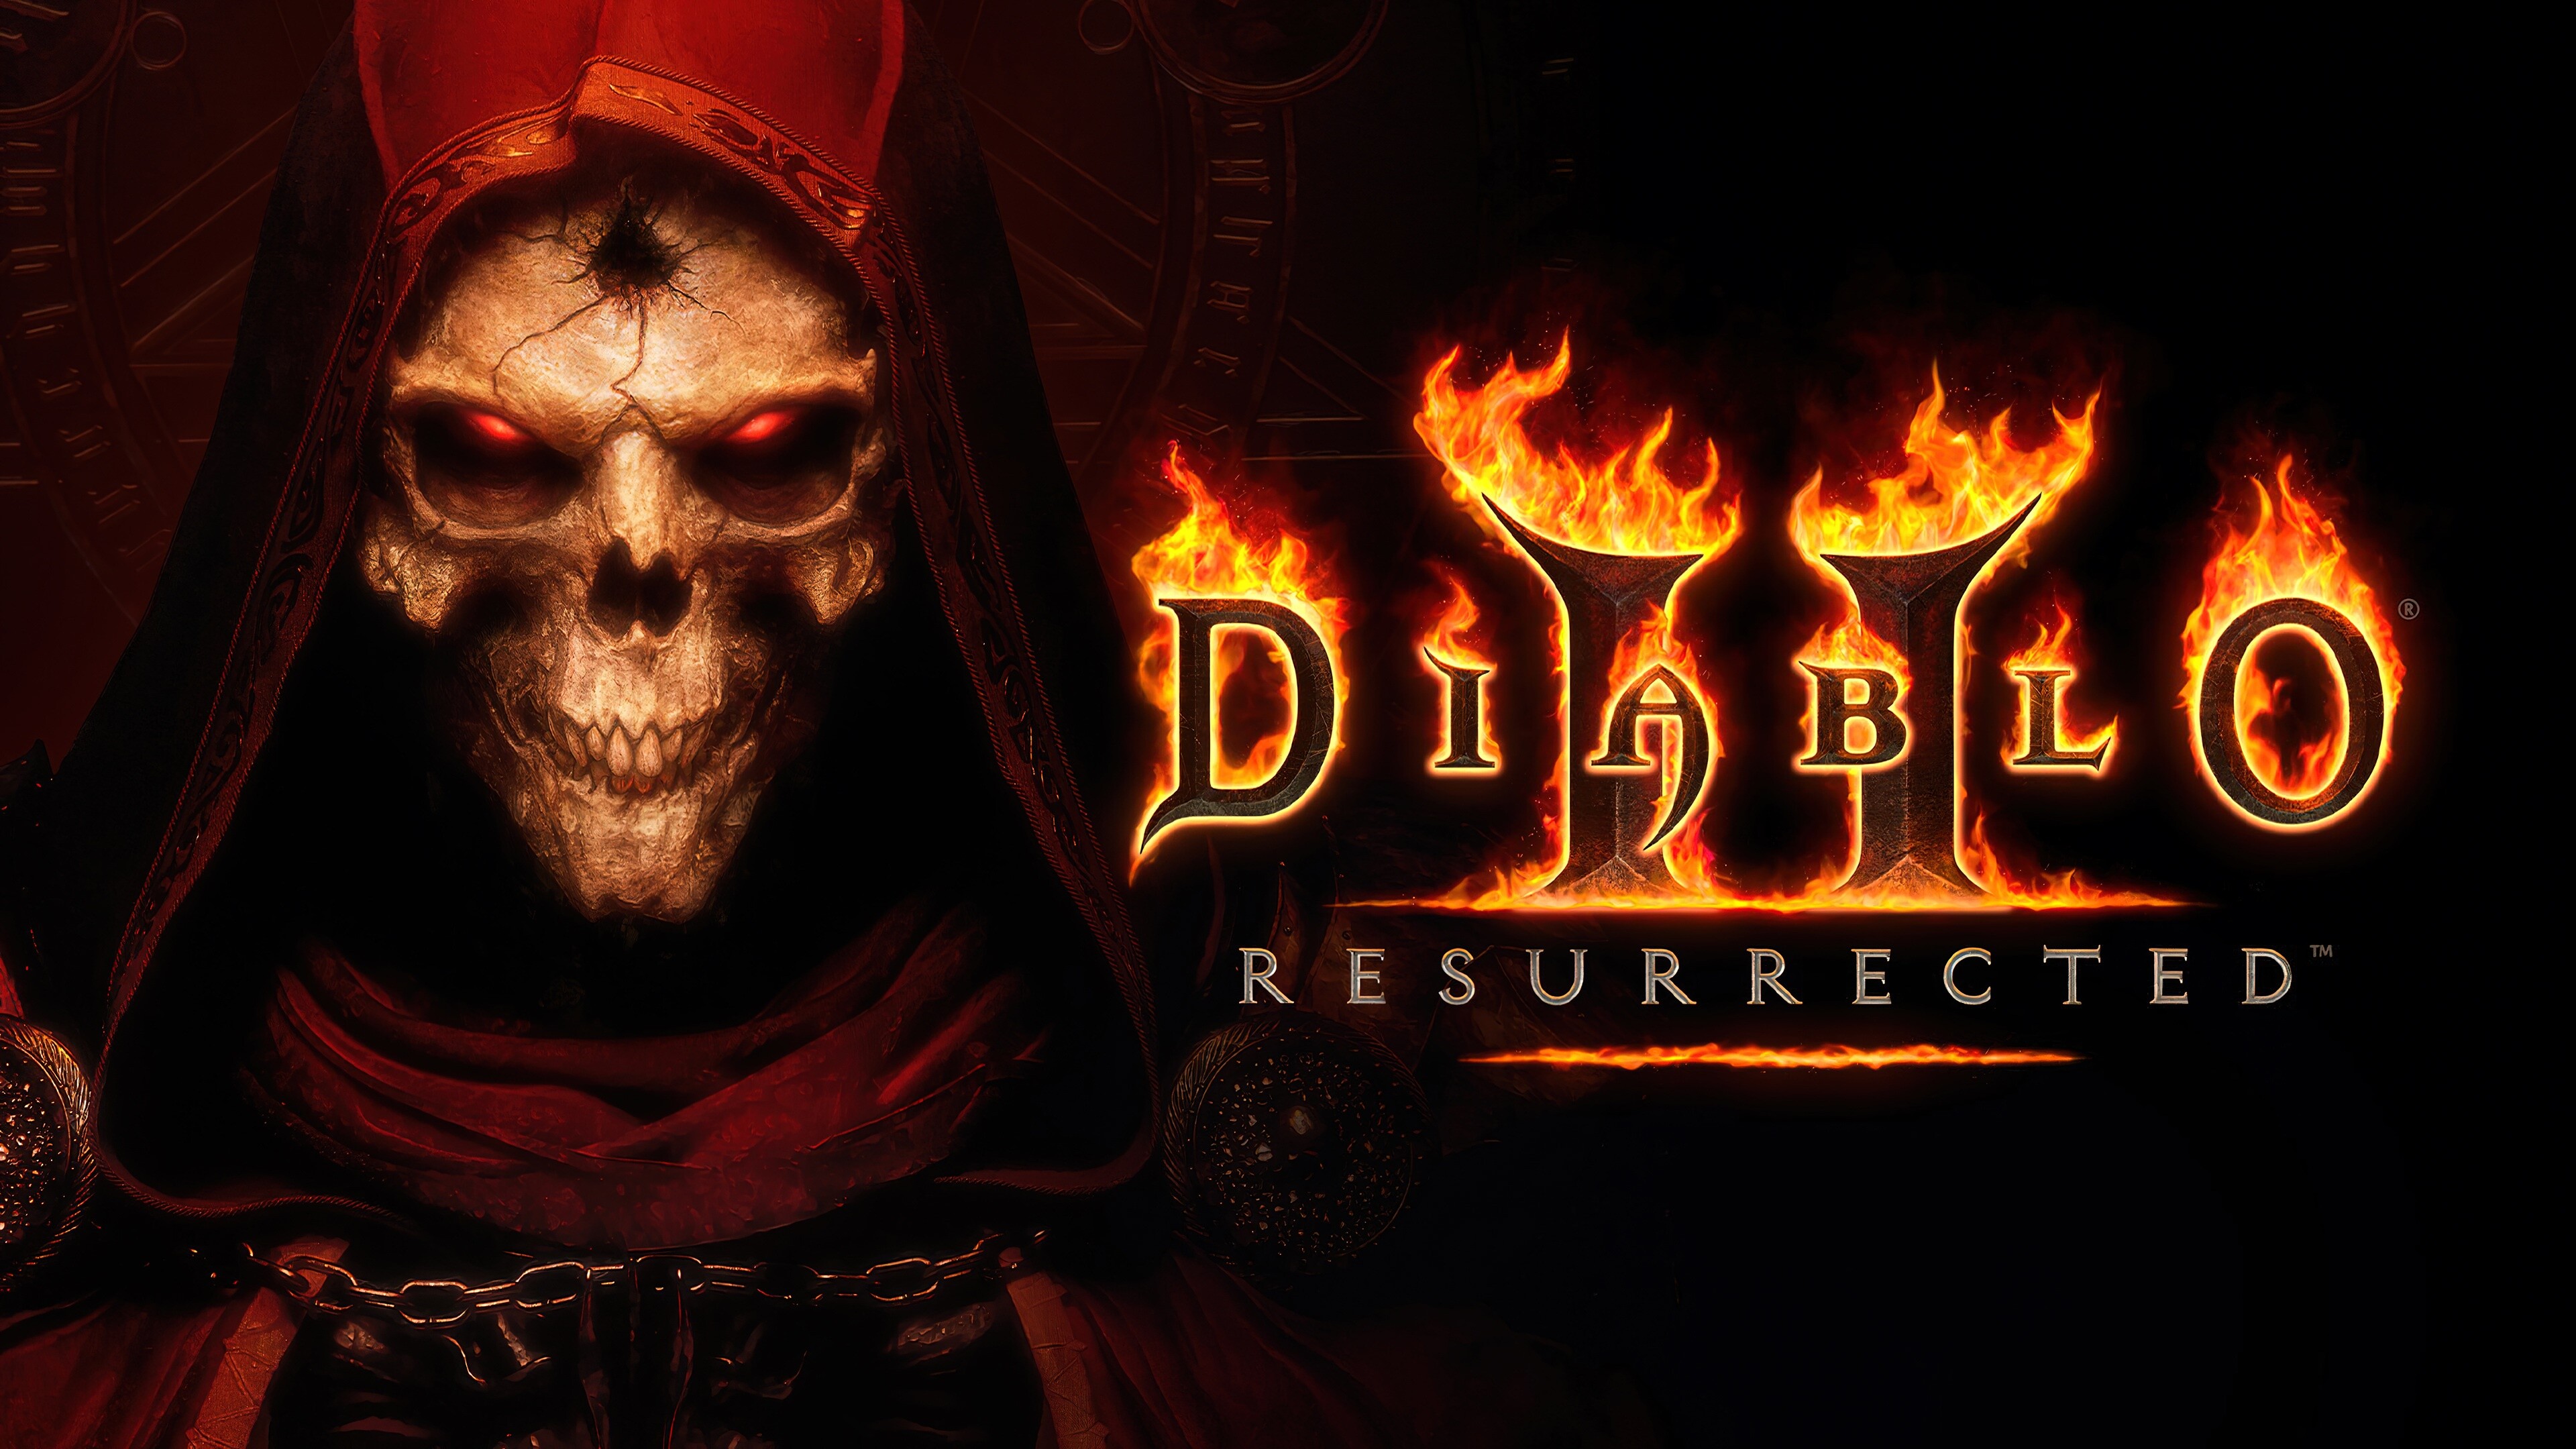 Diablo: Resurrected, An action role-playing video game co-developed by Blizzard Entertainment and Vicarious Visions. 3840x2160 4K Wallpaper.